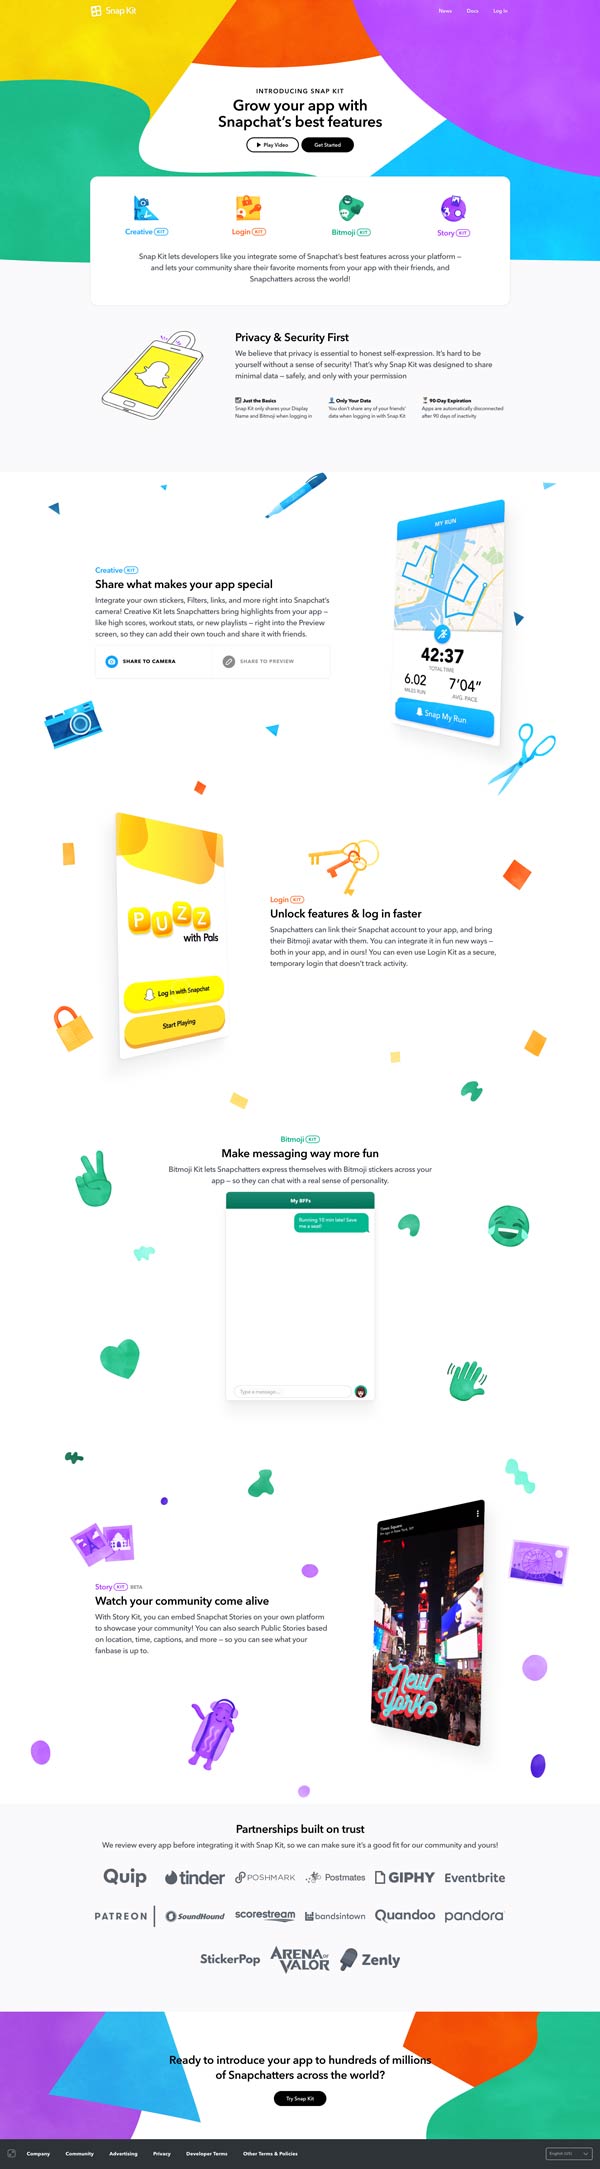 landing page-examples-snapchat